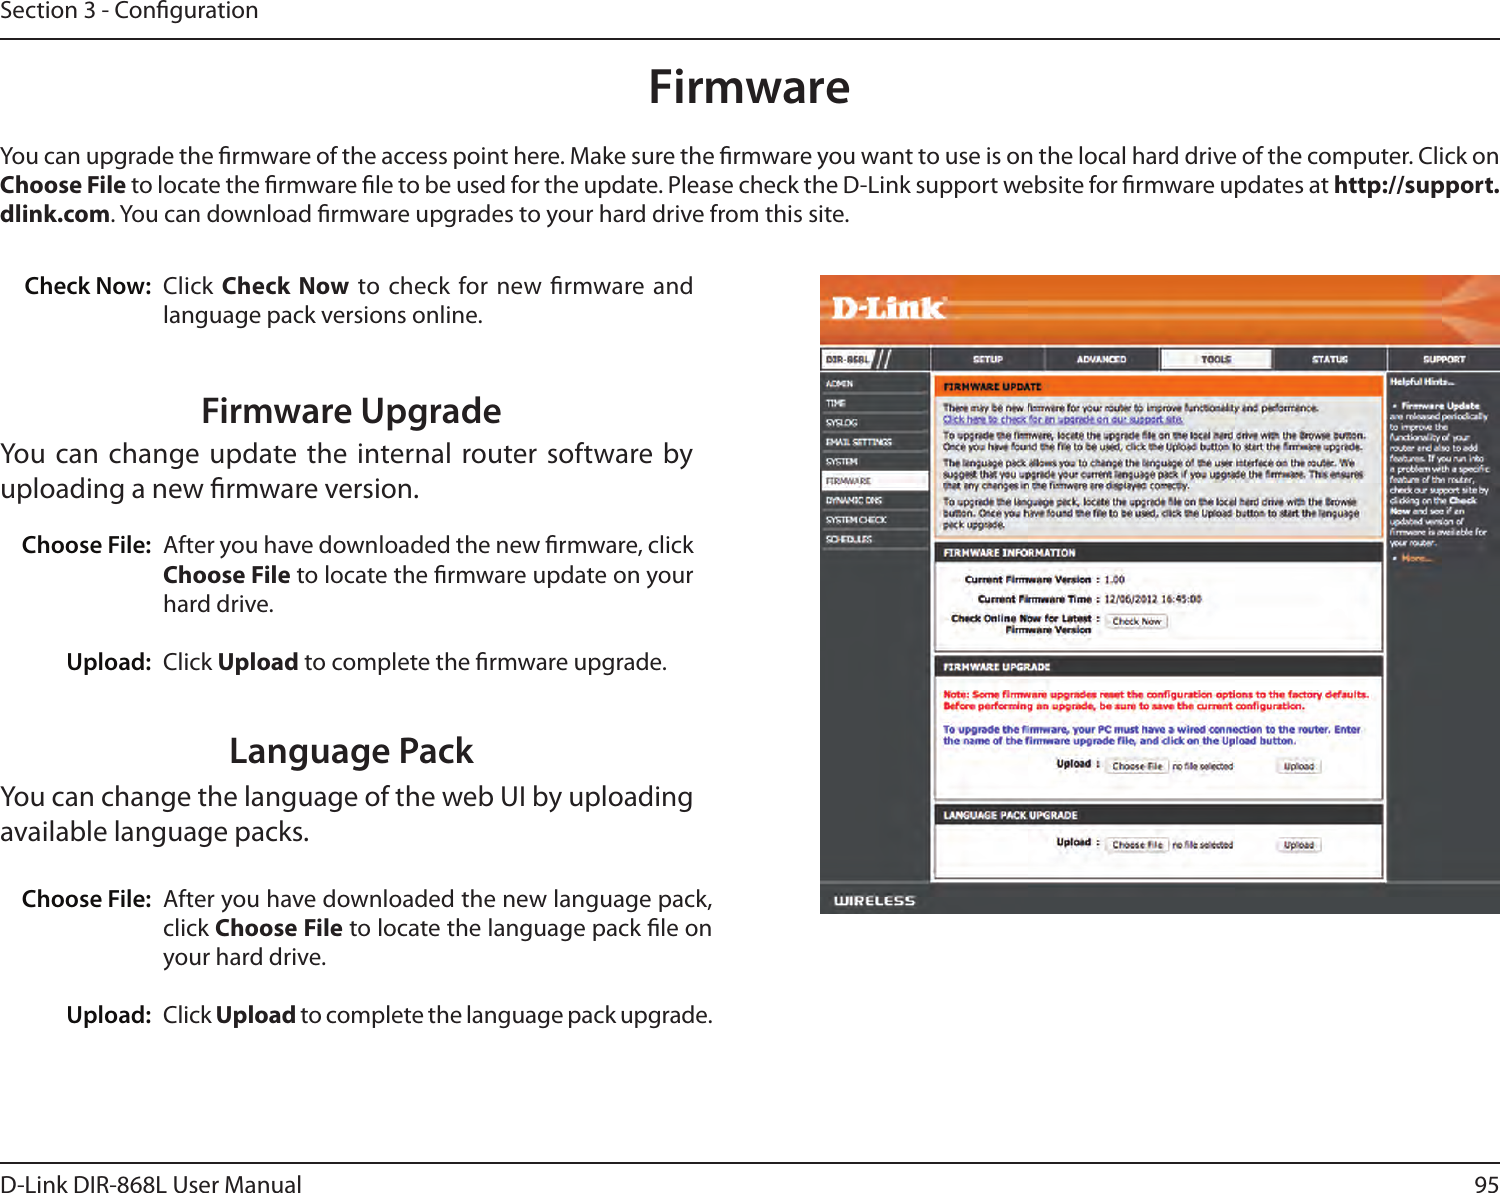 95D-Link DIR-868L User ManualSection 3 - CongurationFirmwareChoose File:Upload:After you have downloaded the new rmware, click Choose File to locate the rmware update on your hard drive.Click Upload to complete the rmware upgrade.You can upgrade the rmware of the access point here. Make sure the rmware you want to use is on the local hard drive of the computer. Click on Choose File to locate the rmware le to be used for the update. Please check the D-Link support website for rmware updates at http://support.dlink.com. You can download rmware upgrades to your hard drive from this site.After you have downloaded the new language pack, click Choose File to locate the language pack le on your hard drive.Click Upload to complete the language pack upgrade.Language PackYou can change the language of the web UI by uploading available language packs.Choose File:Upload:Click Check  Now to check for new rmware  and language pack versions online.Check Now:Firmware UpgradeYou can change  update the internal router software by uploading a new rmware version.